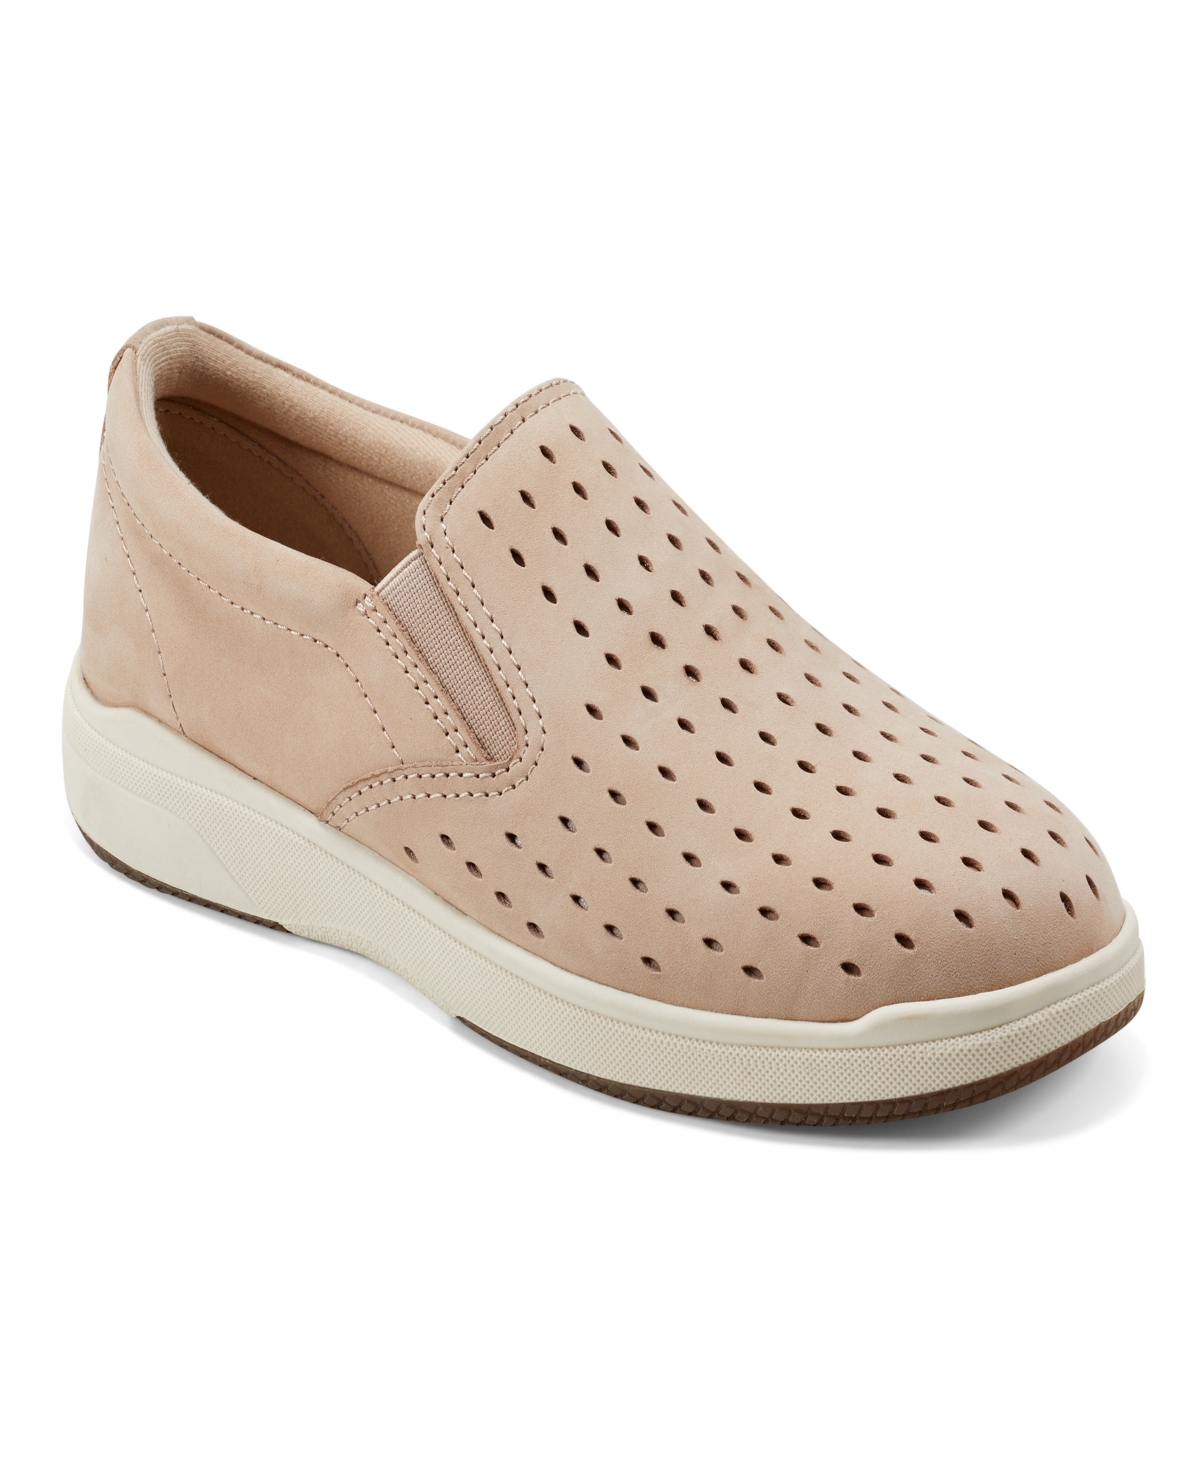 Earth Women's Nel Laser Cut Round Toe Casual Slip-On Sneakers - Light Natural Nubuck